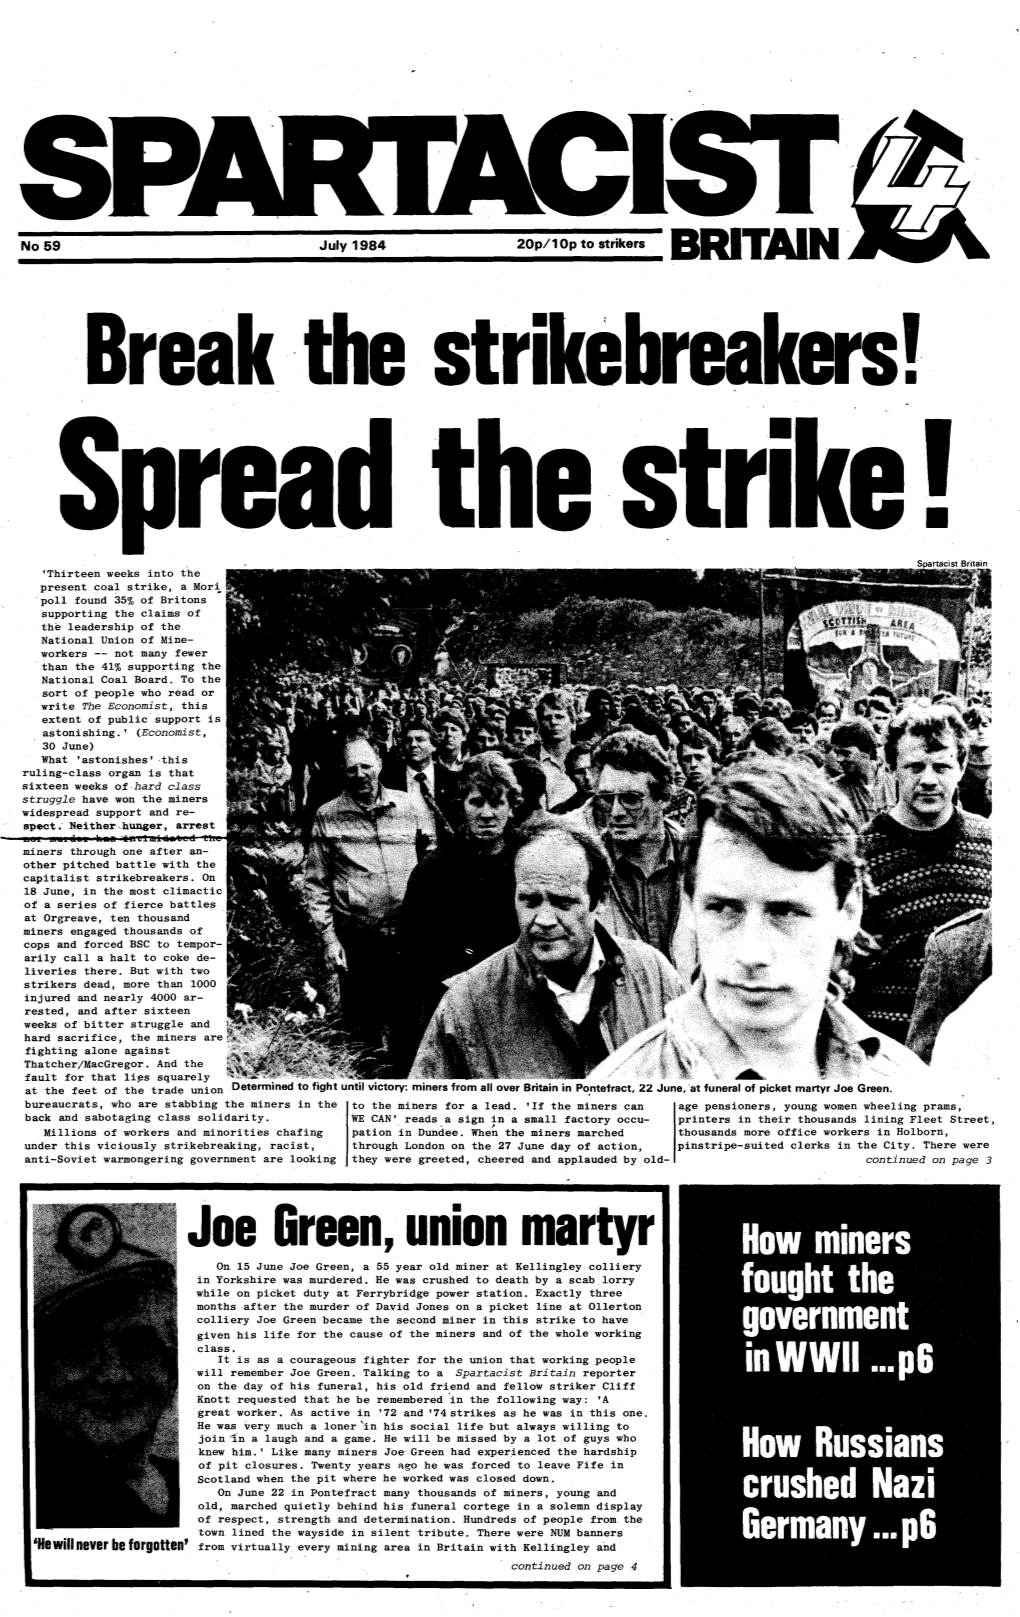 Joe Green, Union Martyr on 15 June Joe Green, a 55 Year Old Miner at Kellingley Colliery in Yorkshire Was Murdered